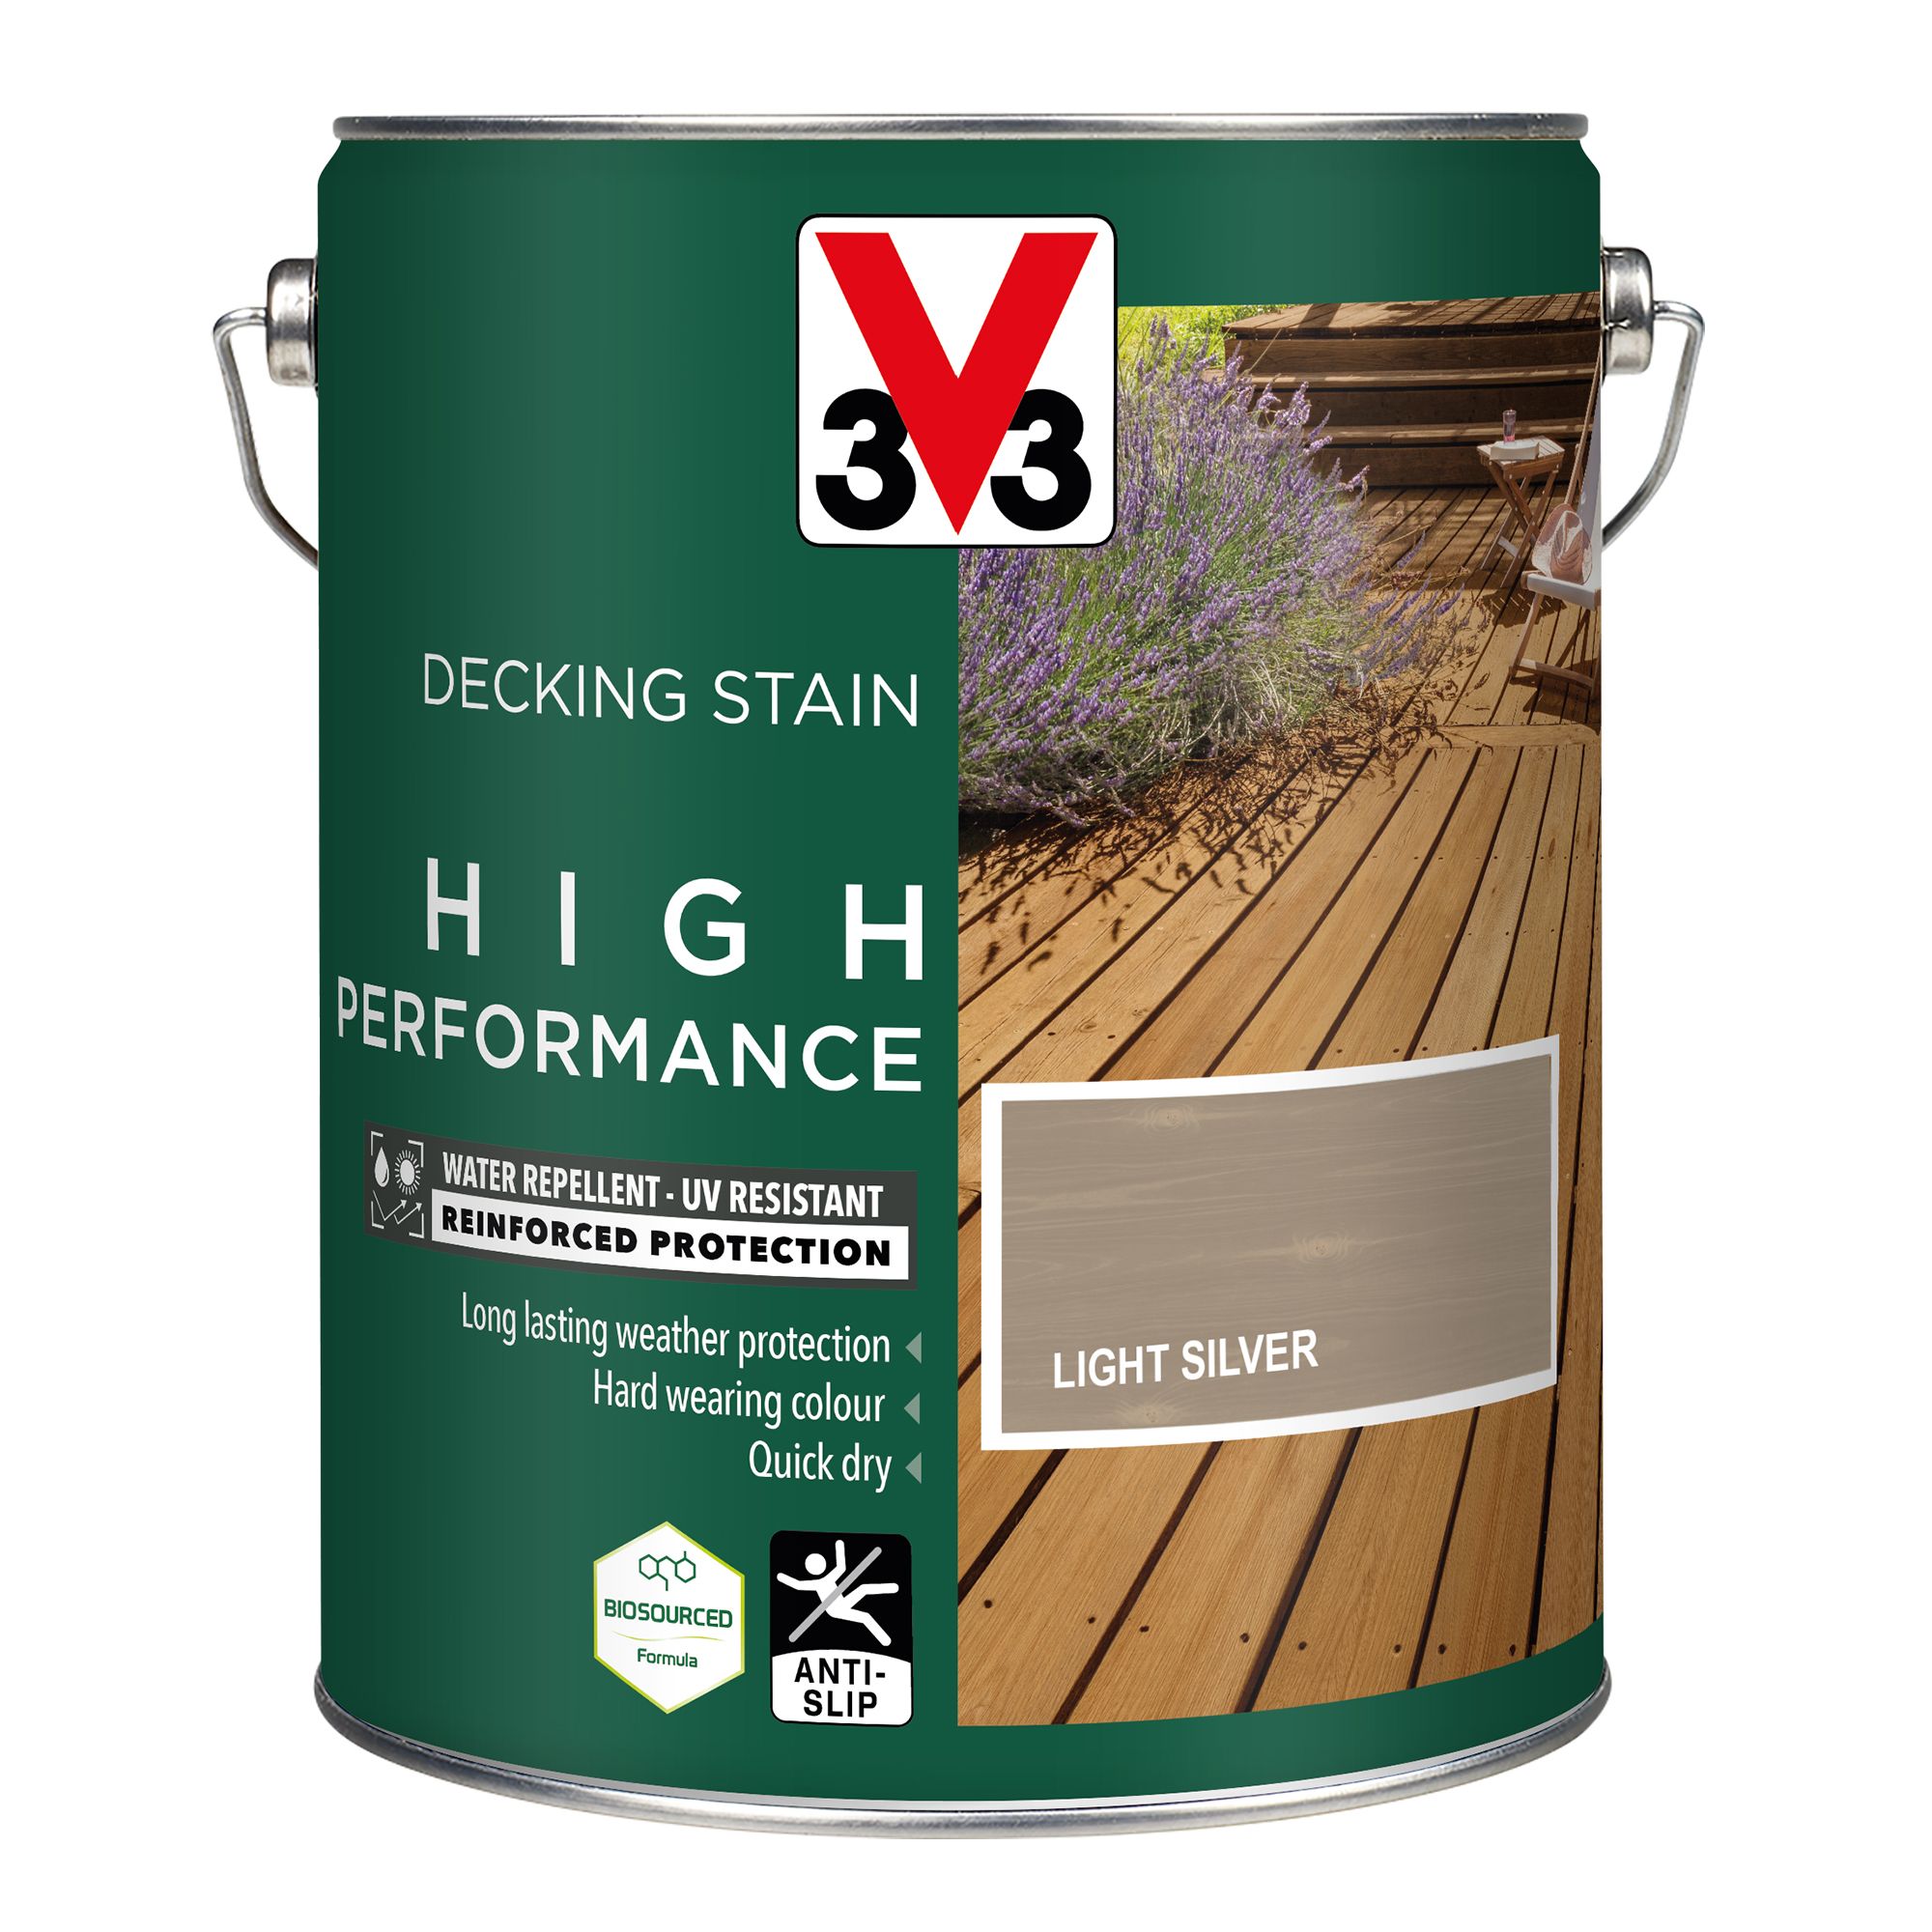 V33 High performance Light Silver Satin Quick dry Decking Stain, 5L